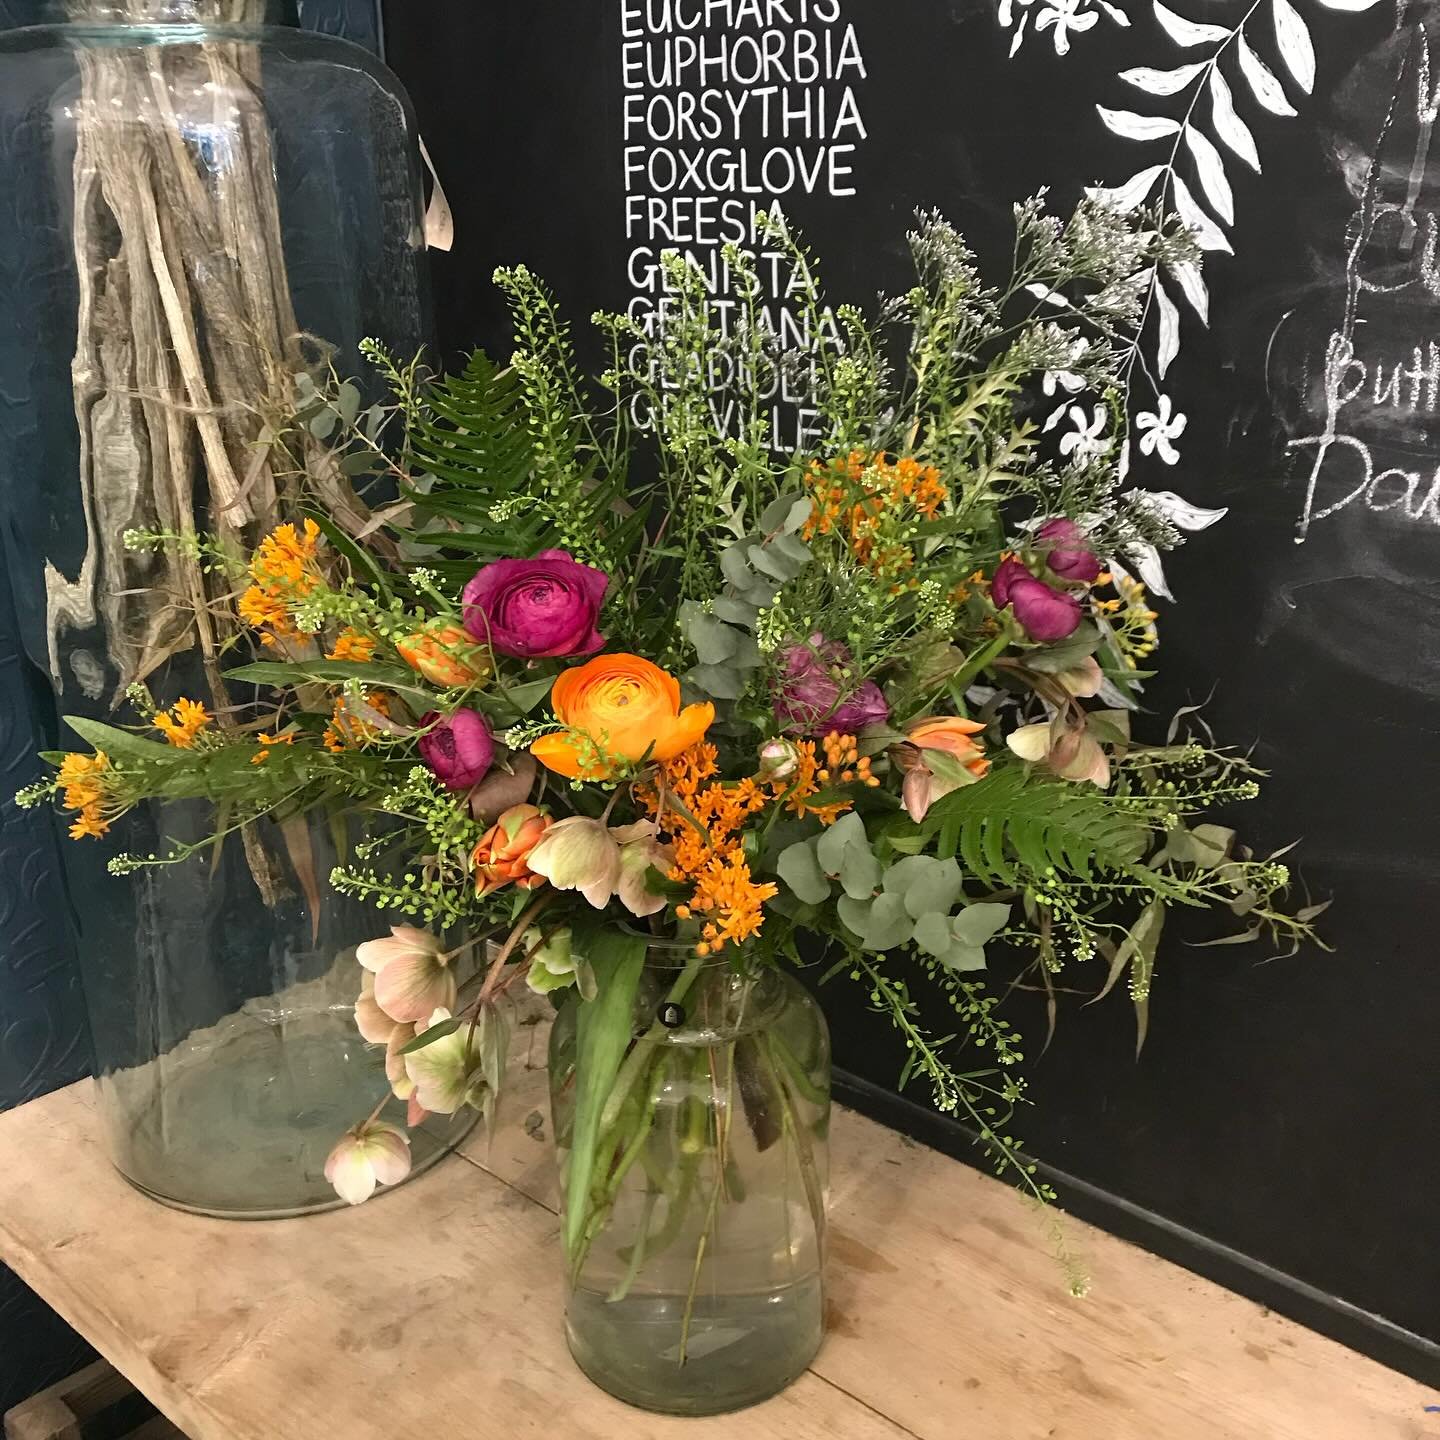 Join me for another fun, informative and relaxed workshop @scottishcraftschool In Dunblane on Sunday 19th. 

This time we&rsquo;ll be learning how to create a vase arrangement for home with an abundance of gorgeous blooms. Only a few spaces left. Lin